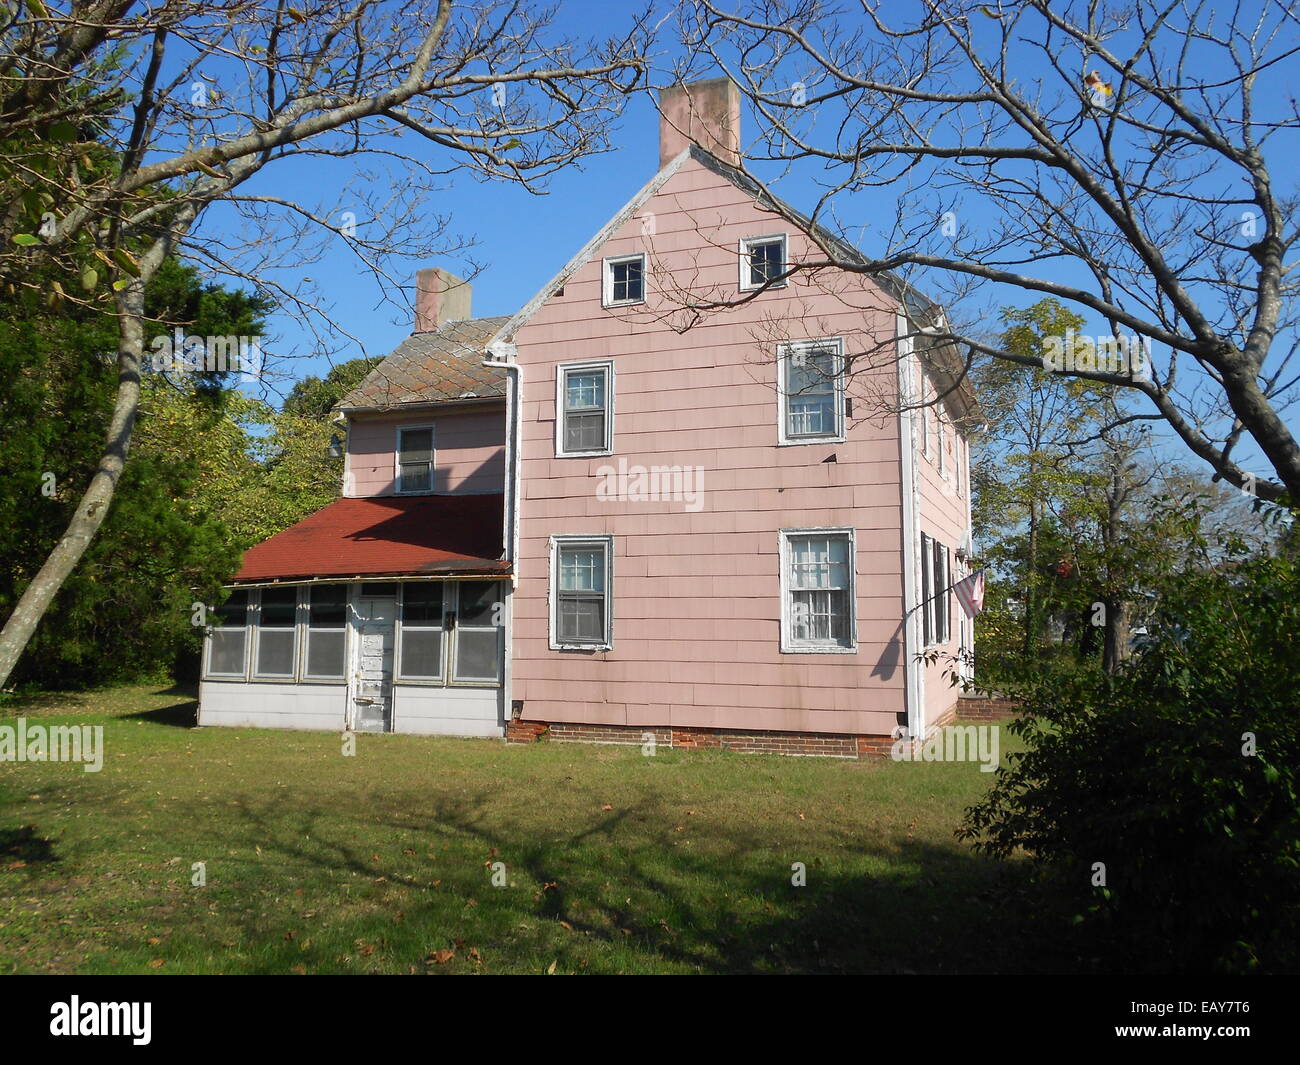 Judge Nathaniel Foster House listed on the NRHP on August 25, 2014 (#14000516) at 1649 Bayshore Dr. in Villas, Lower Township, Cape May County, New Jersey Stock Photo